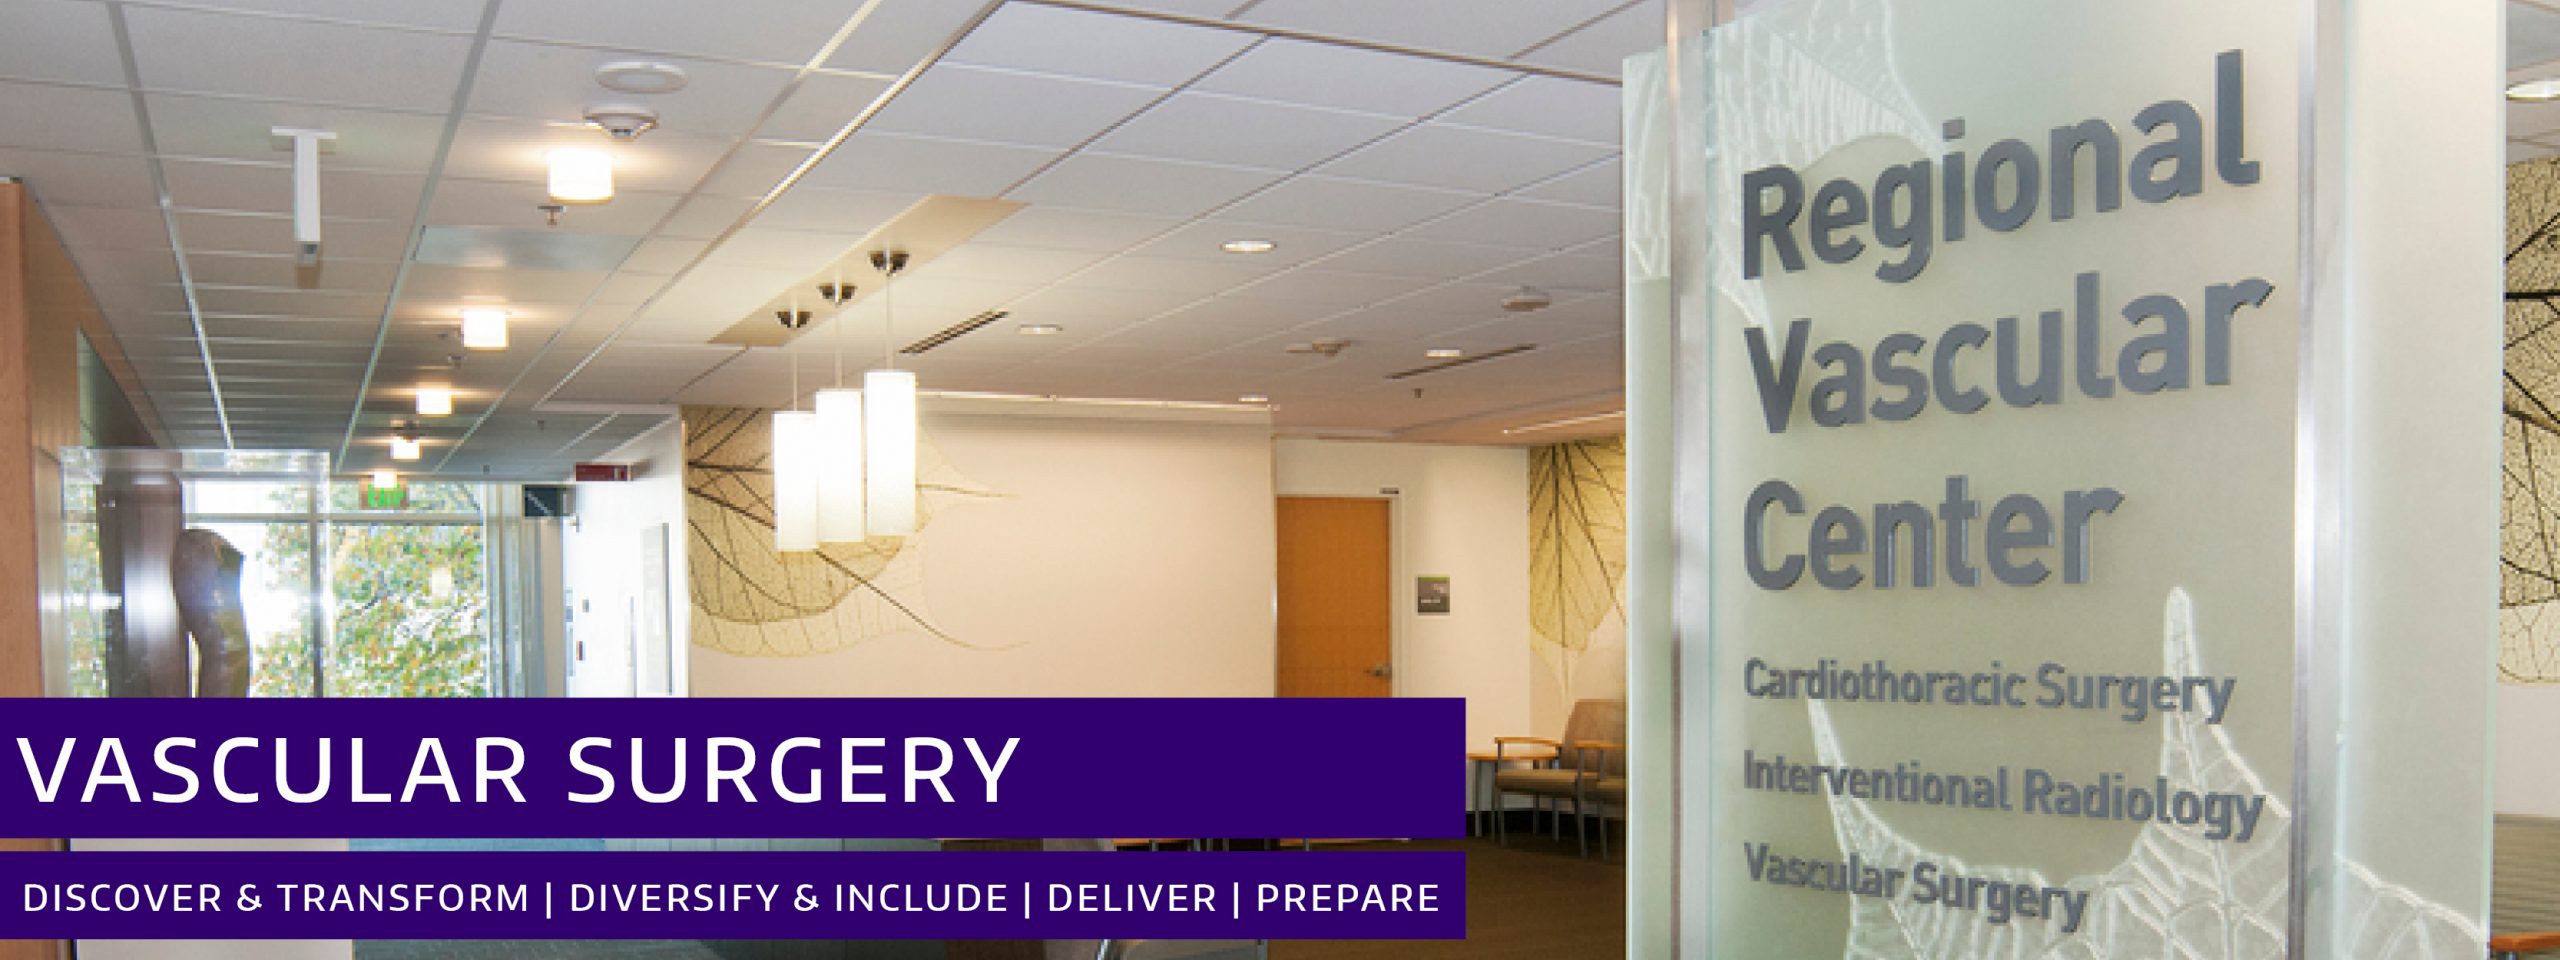 Department of Surgery Division of Vascular Surgery Header Image